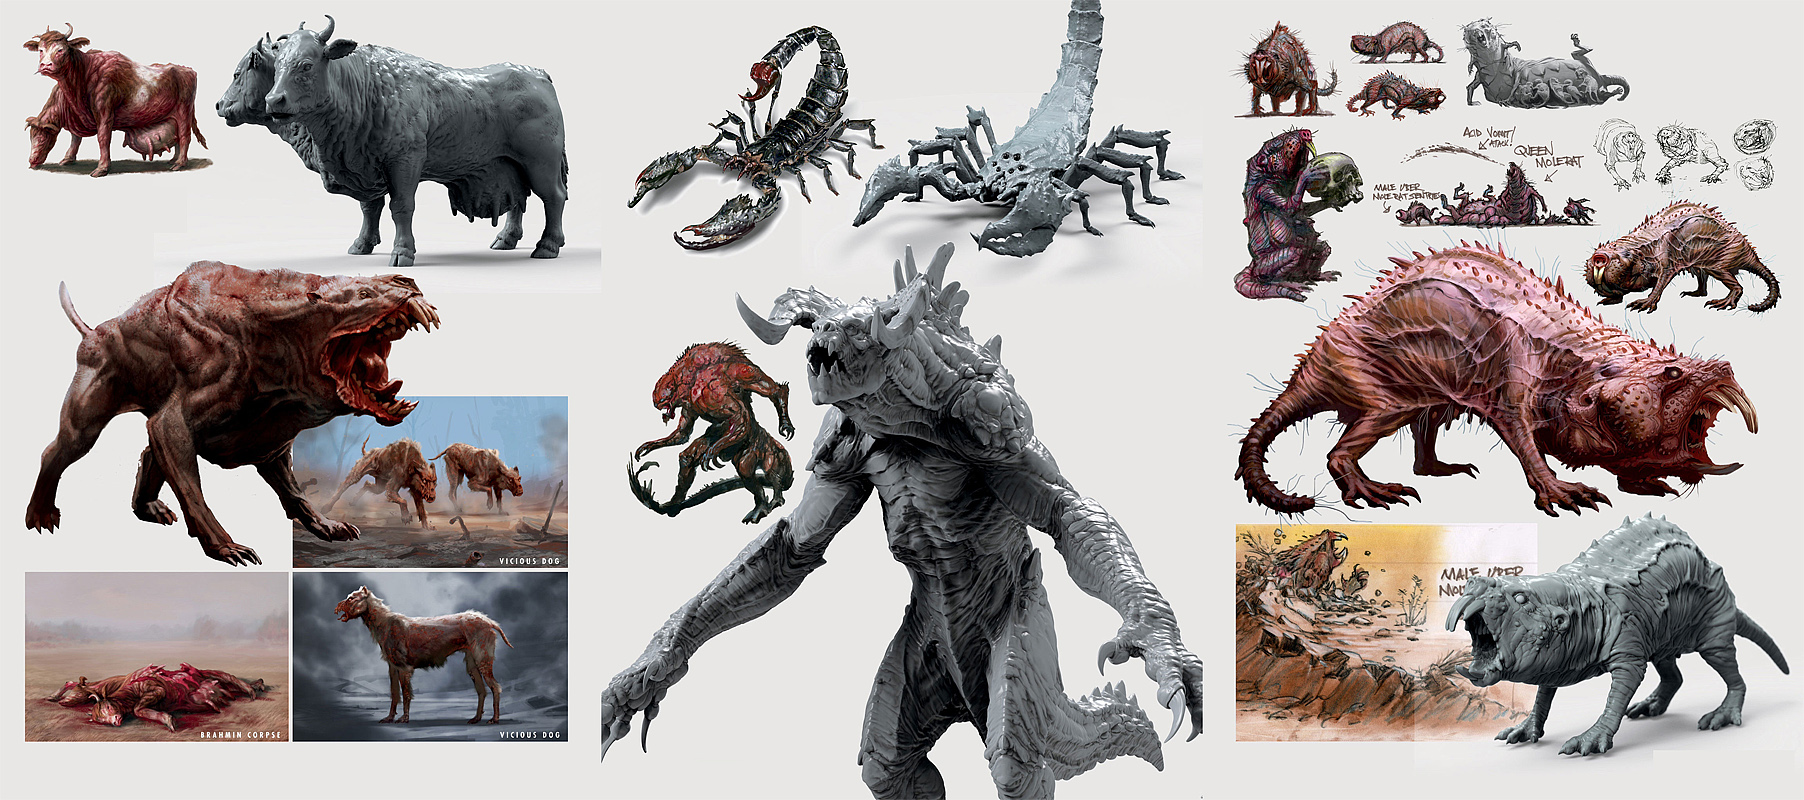 Fallout 4 creatures  Fallout Wiki  FANDOM powered by Wikia